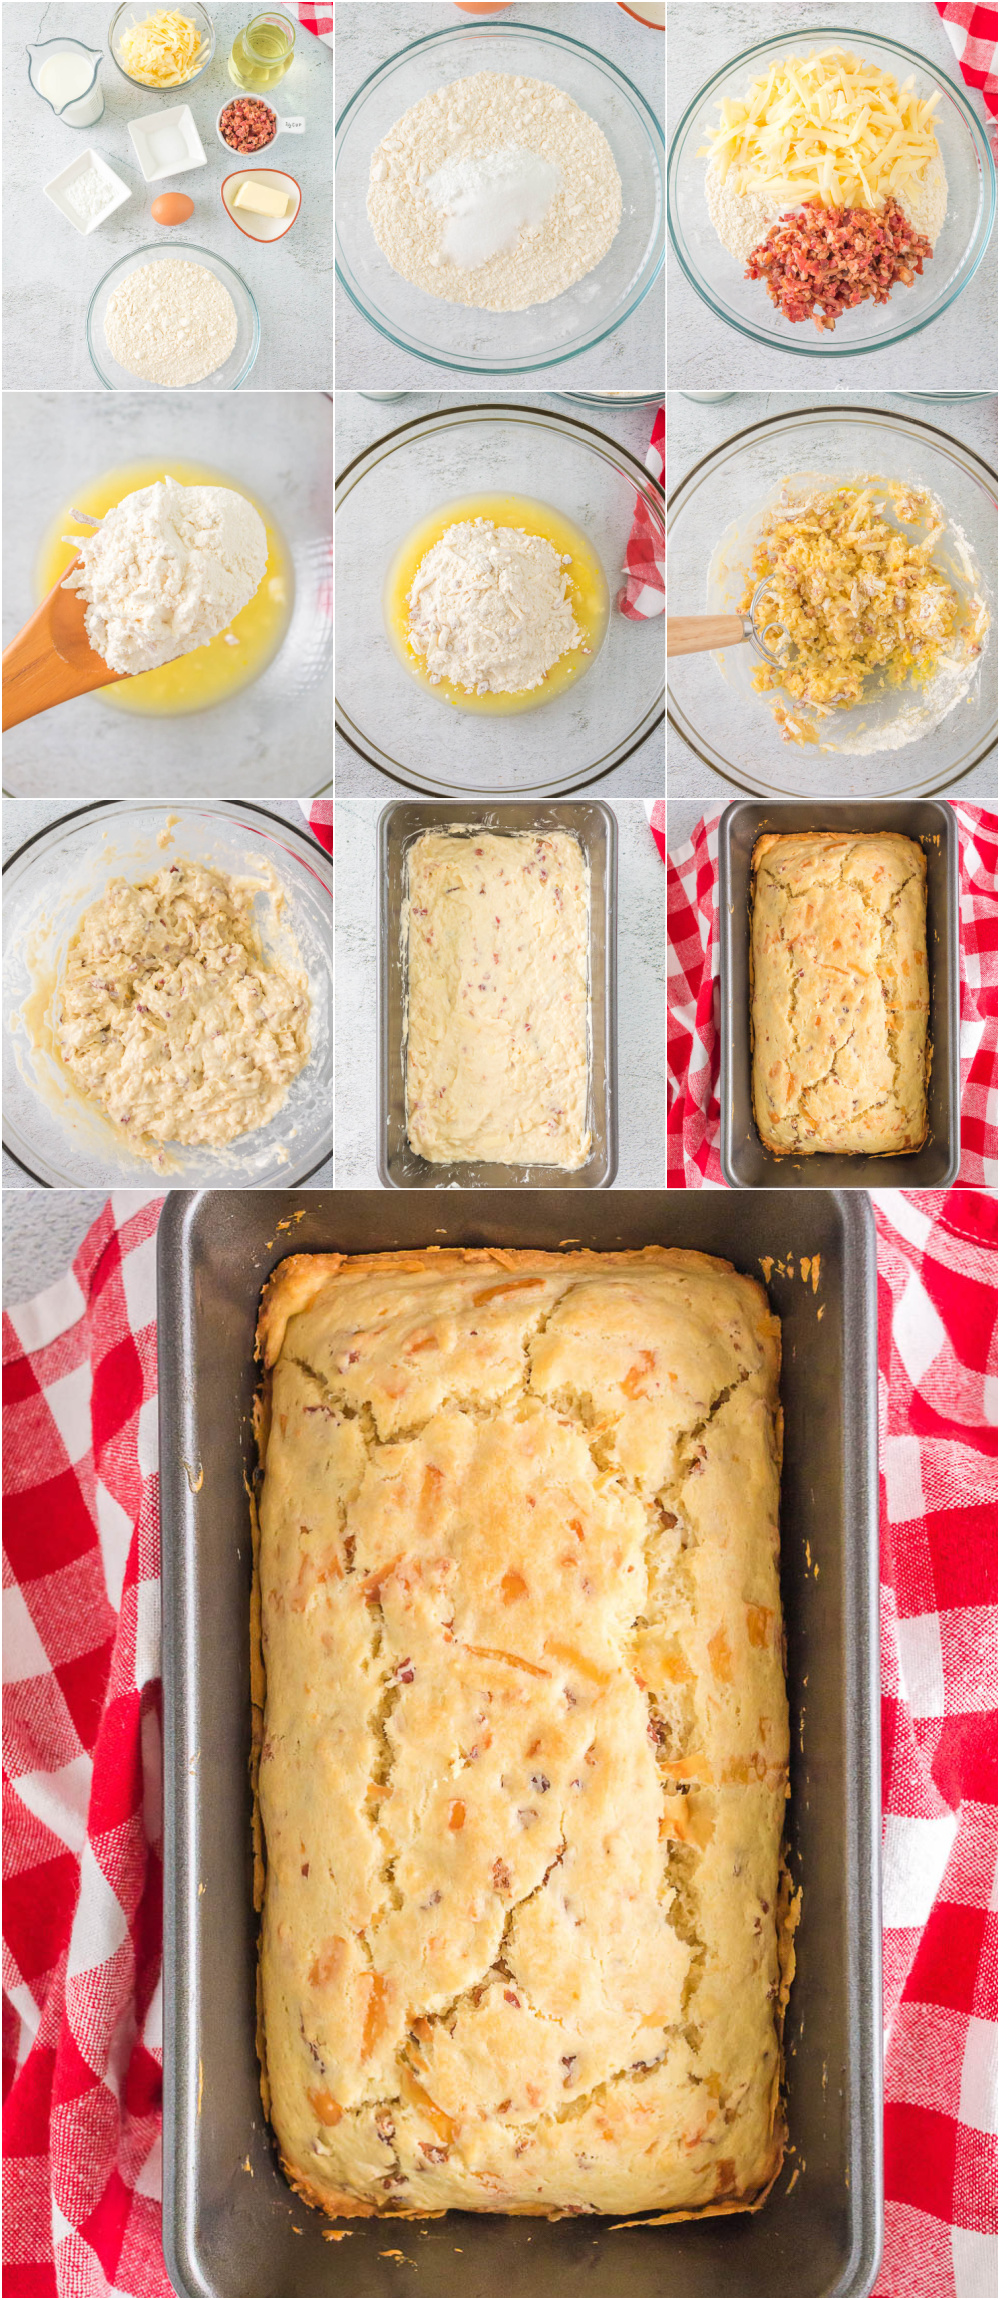 A collage of photos showing the process of making a quick bread.